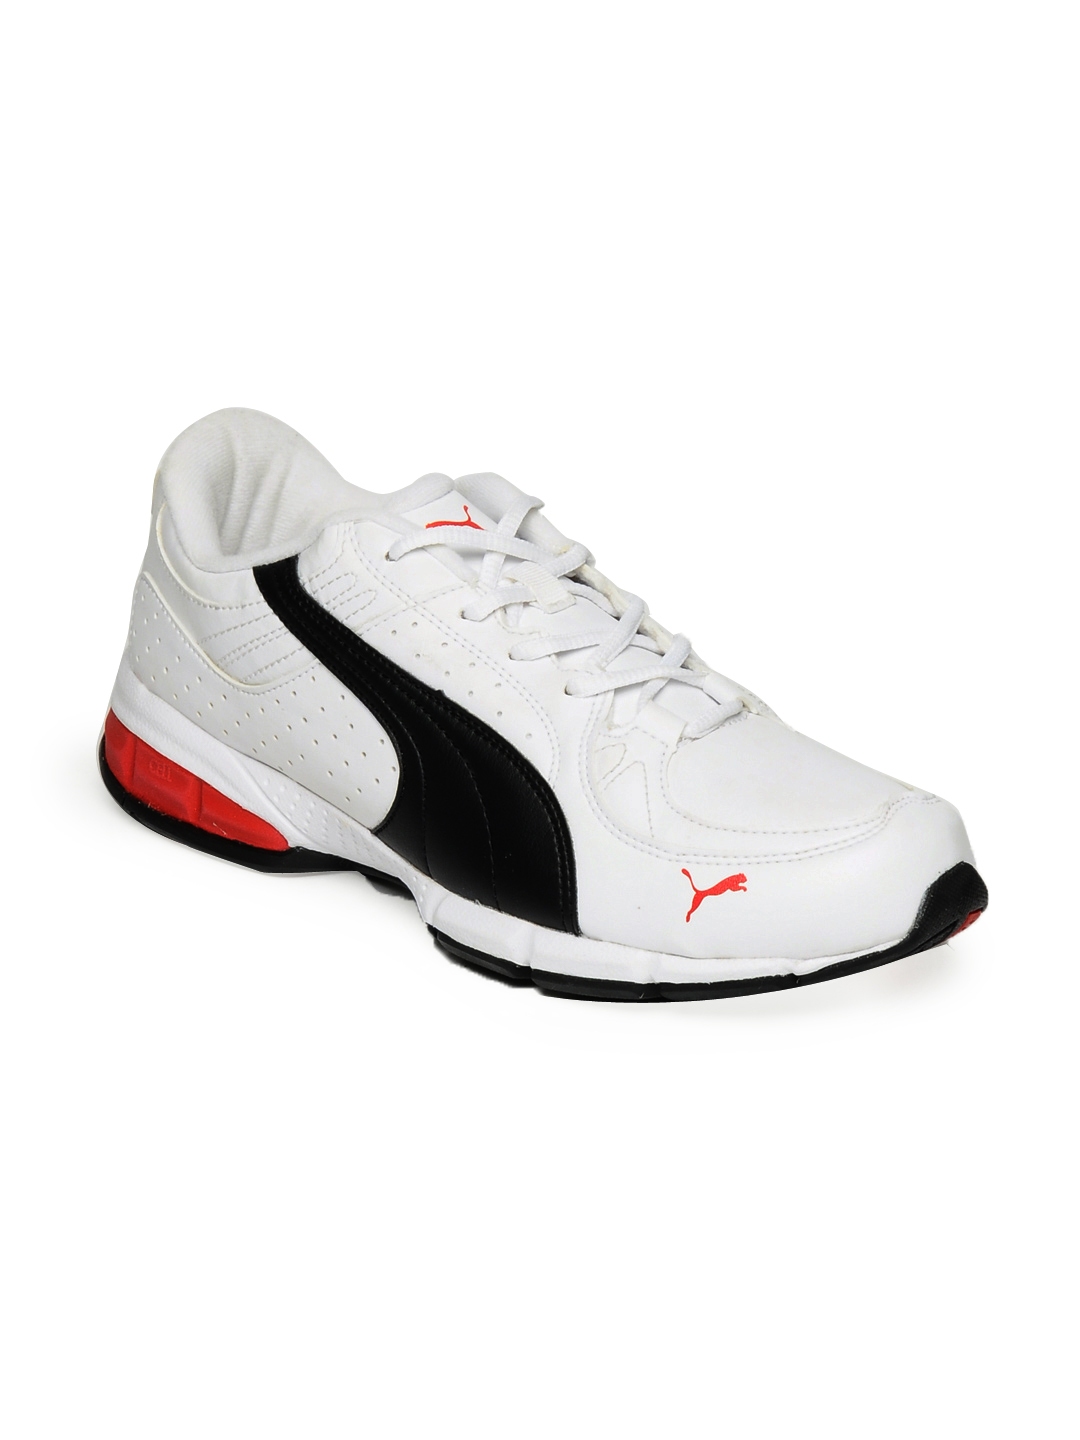 Buy Puma Men White Caliber 2 XT Ind. Sports Shoes - Sports Shoes for ...